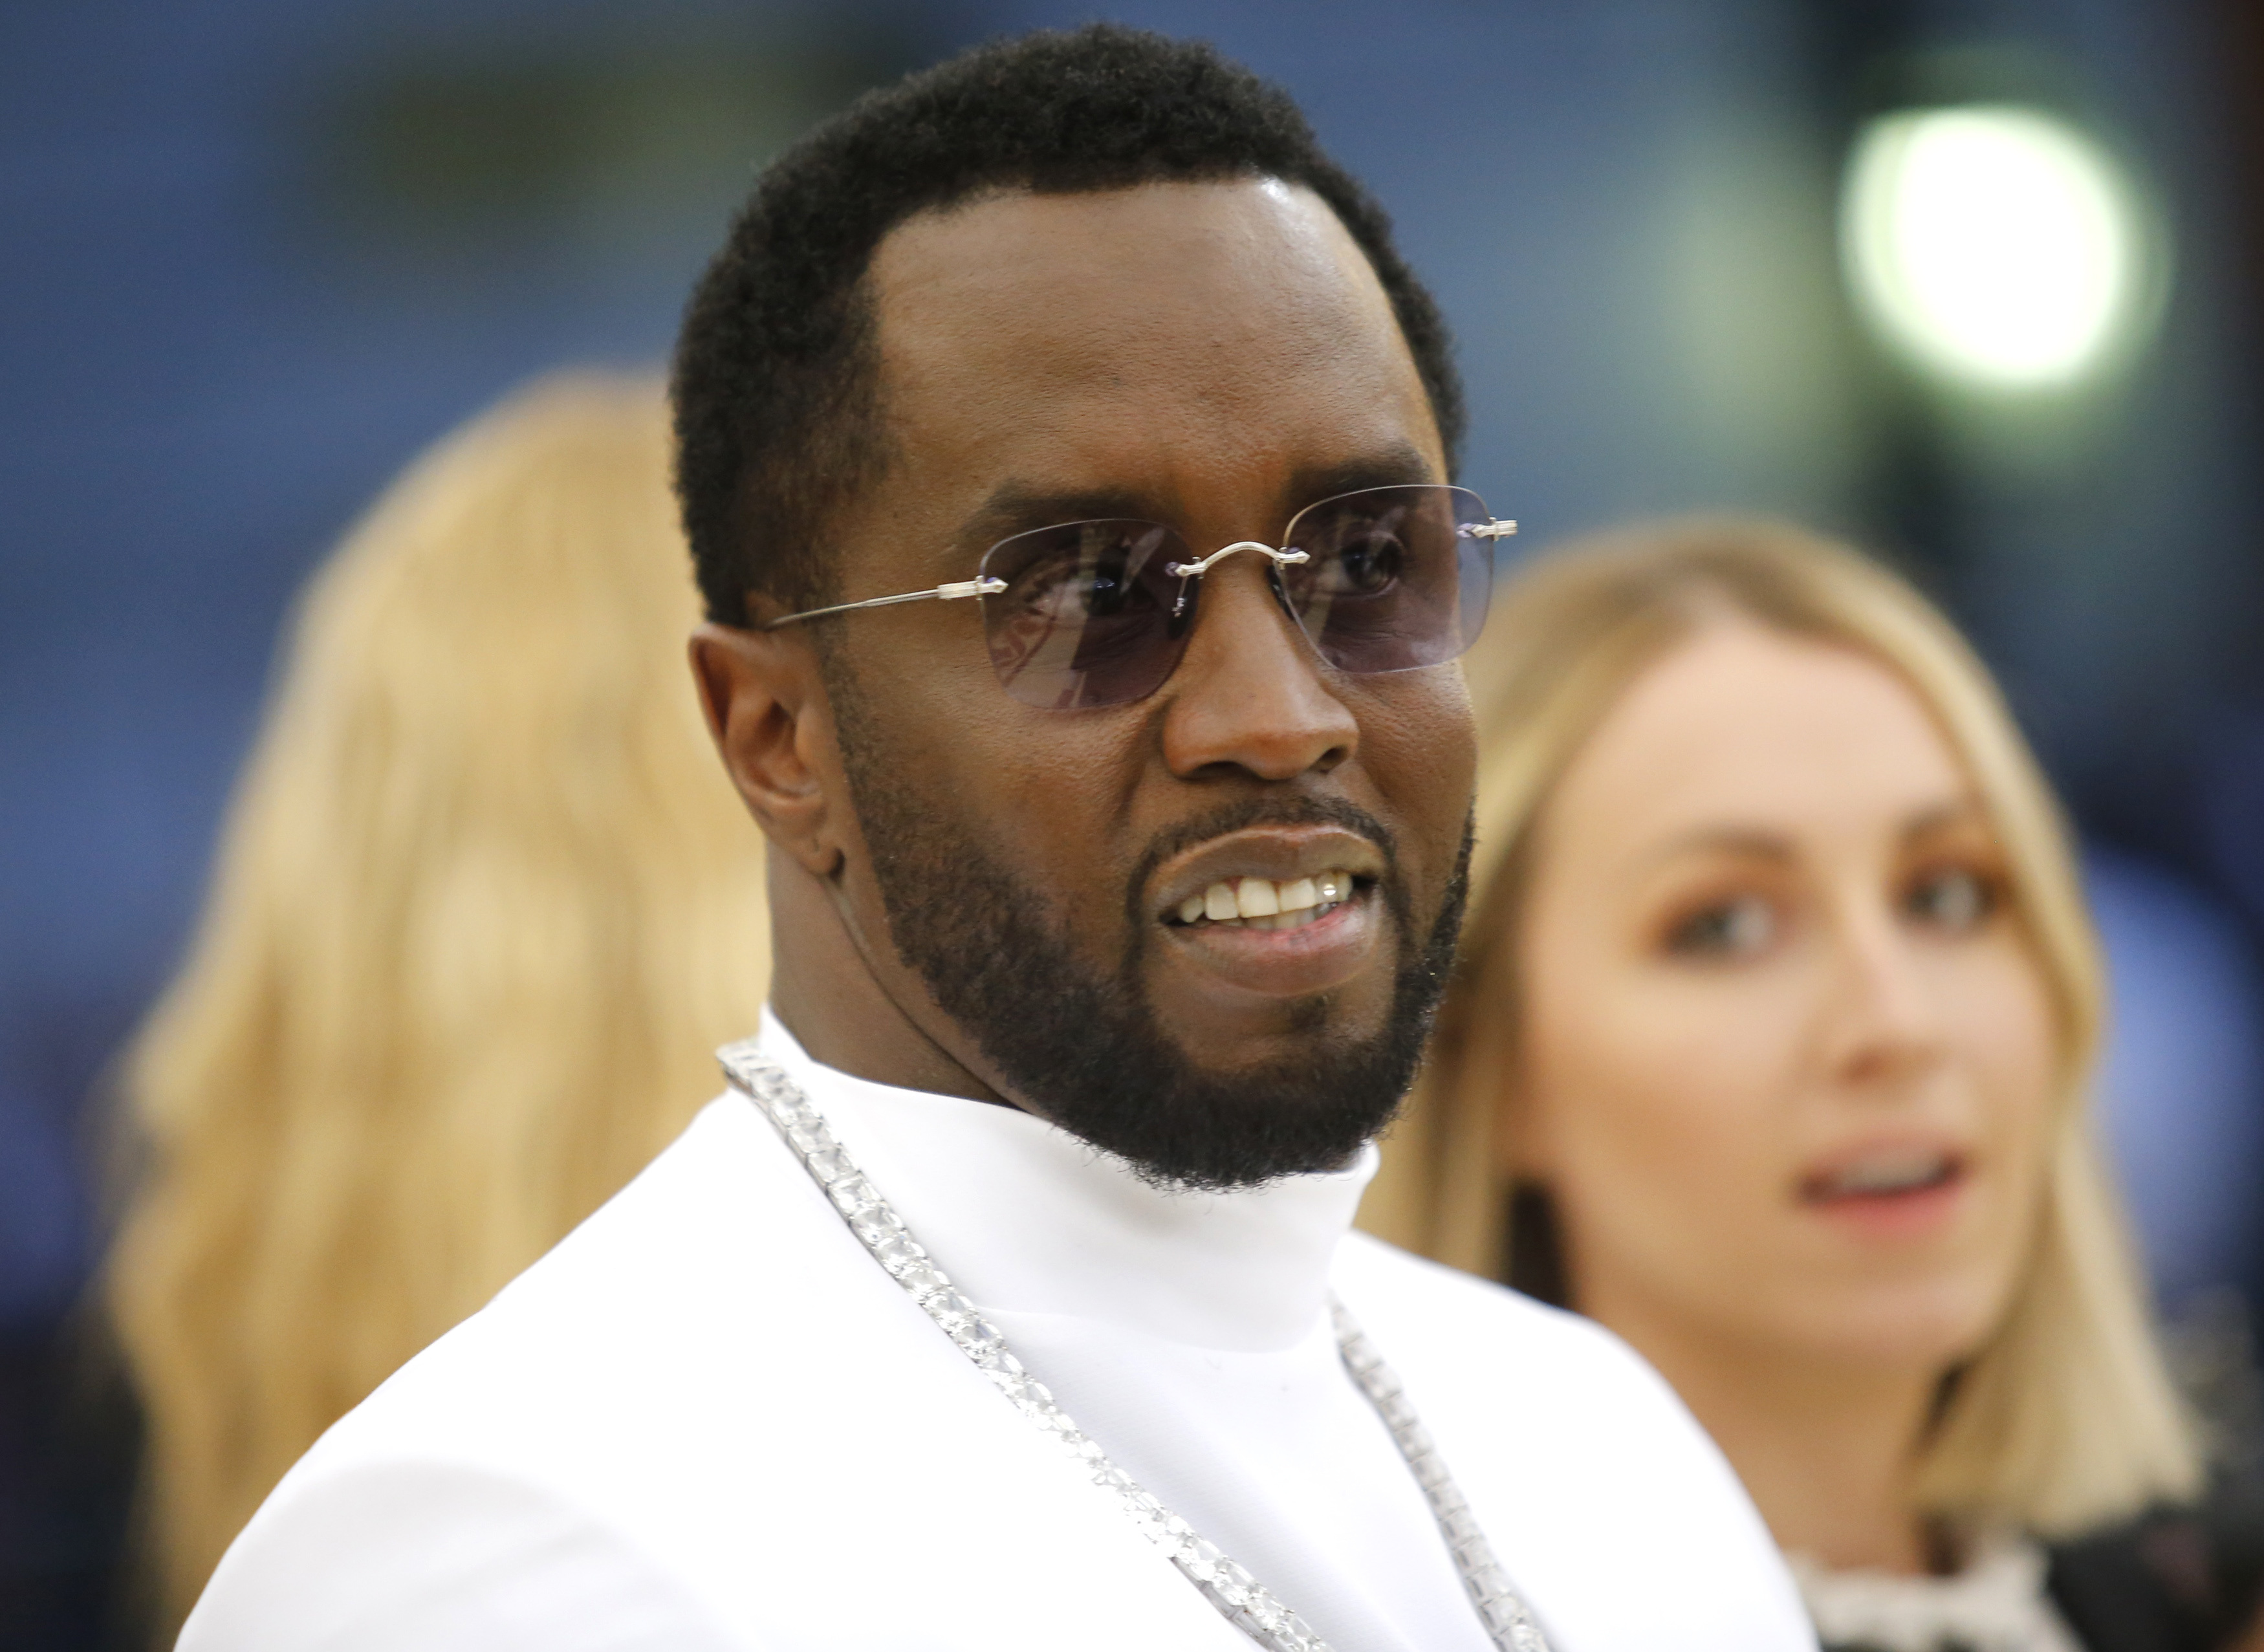 Best Rep Porn Videos 2018 Hd - Sean 'Diddy' Combs accused of sex trafficking, rape of singer Cassie |  Reuters